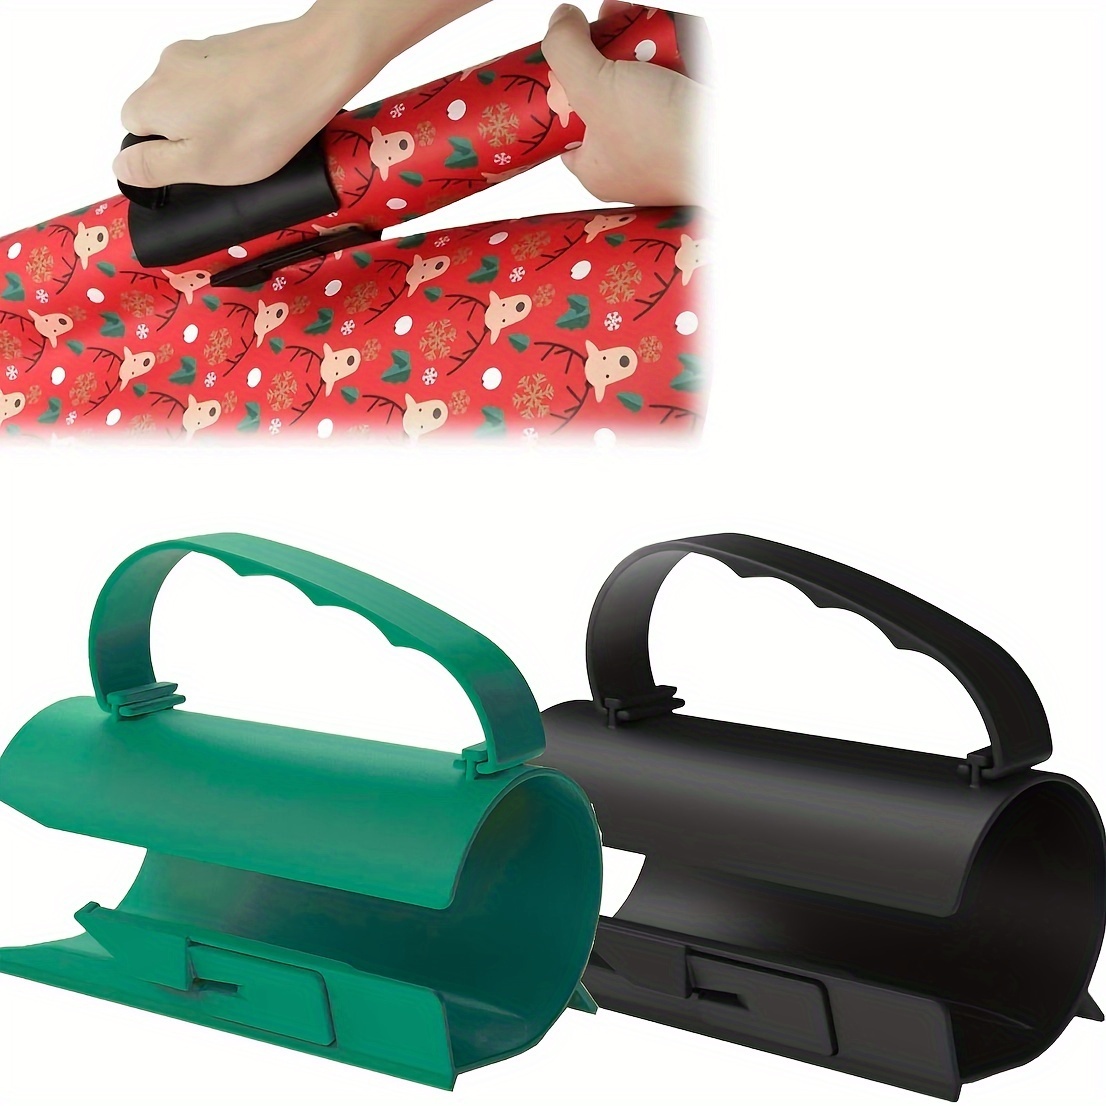 3PcsSliding Wrapping Paper Cutter Roll Wrap Paper Christmas Gift, Portable